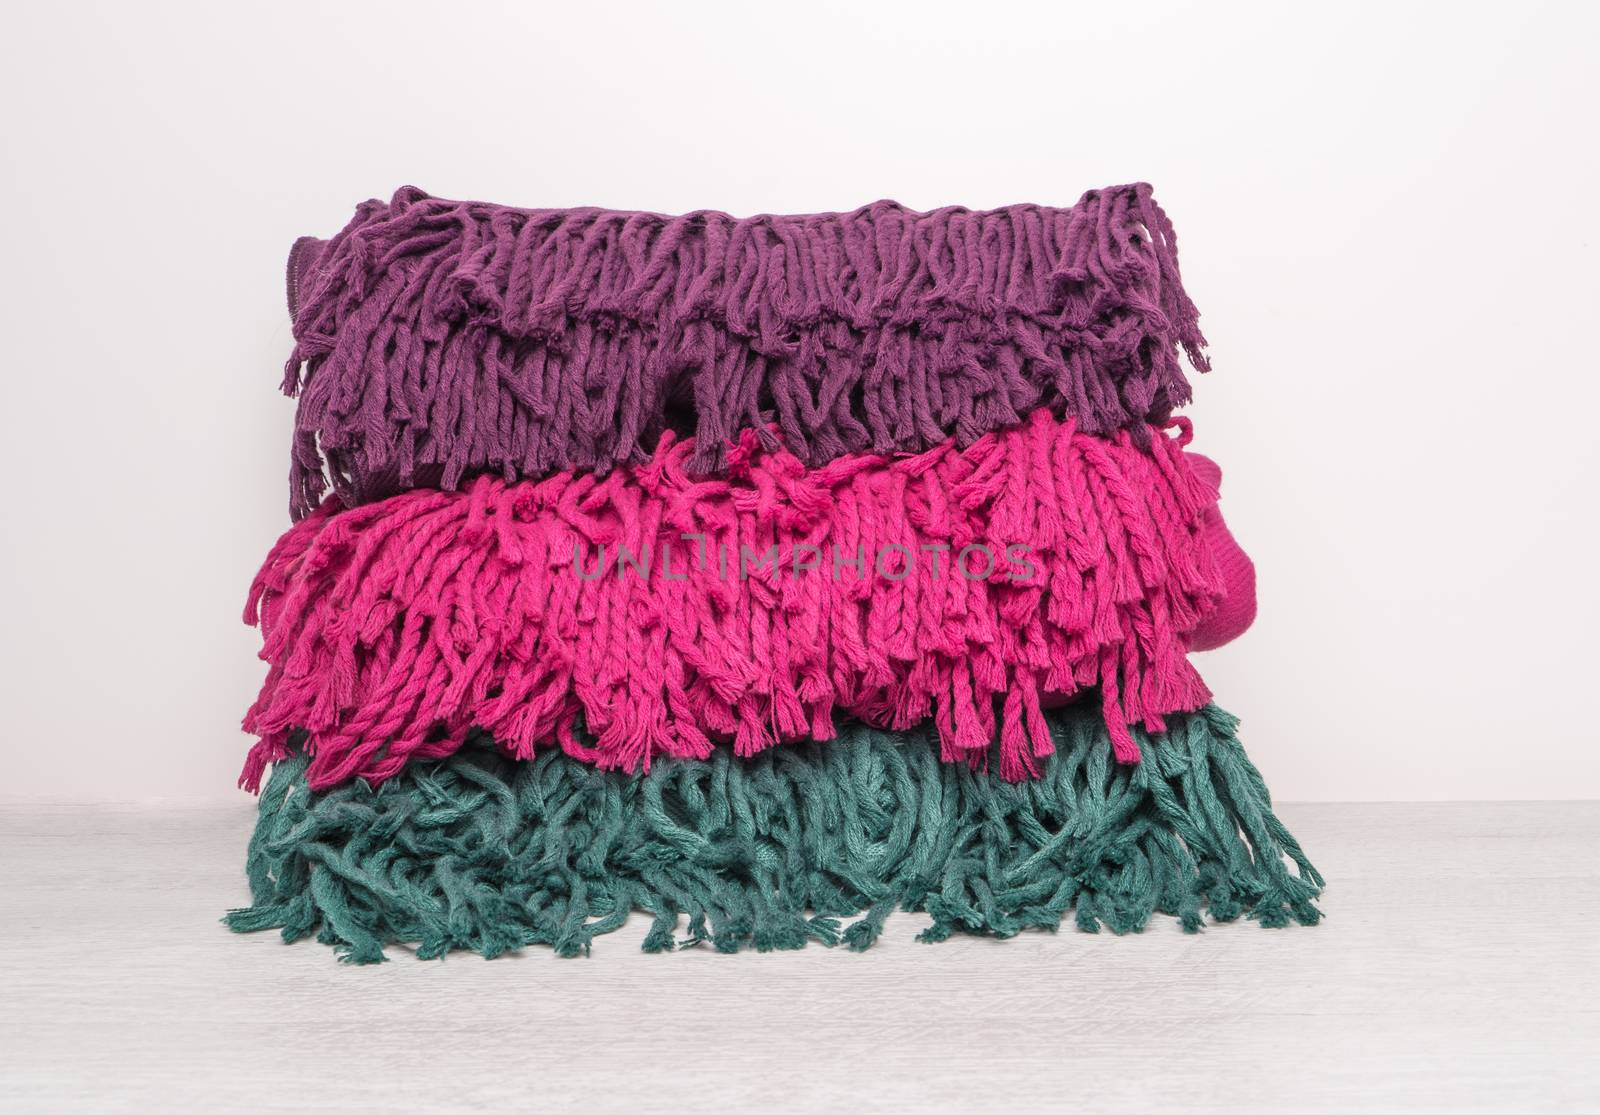 Collection of woolen soft and worm scarves by AnaMarques